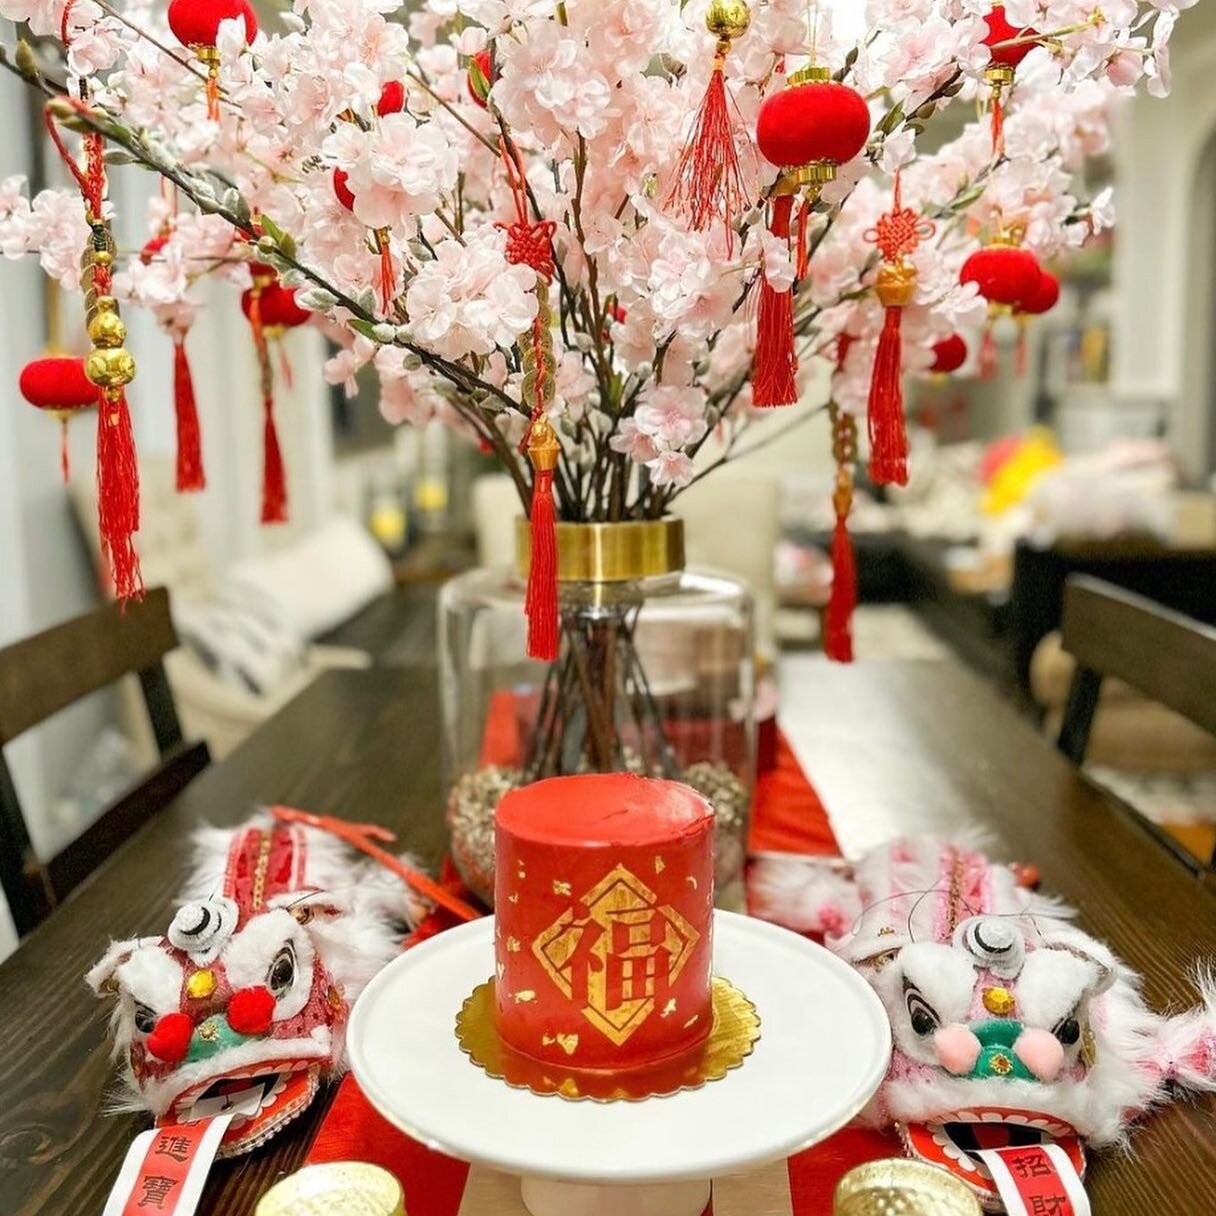 A huge THANK YOU to everyone who ordered a Lunar New Year cake! I was blown away by the response! Fifty cakes definitely pushed the limits of my one-woman operation but it was worth it - we raised $1340 for @aapi.montclair !

It&rsquo;s been so fun t